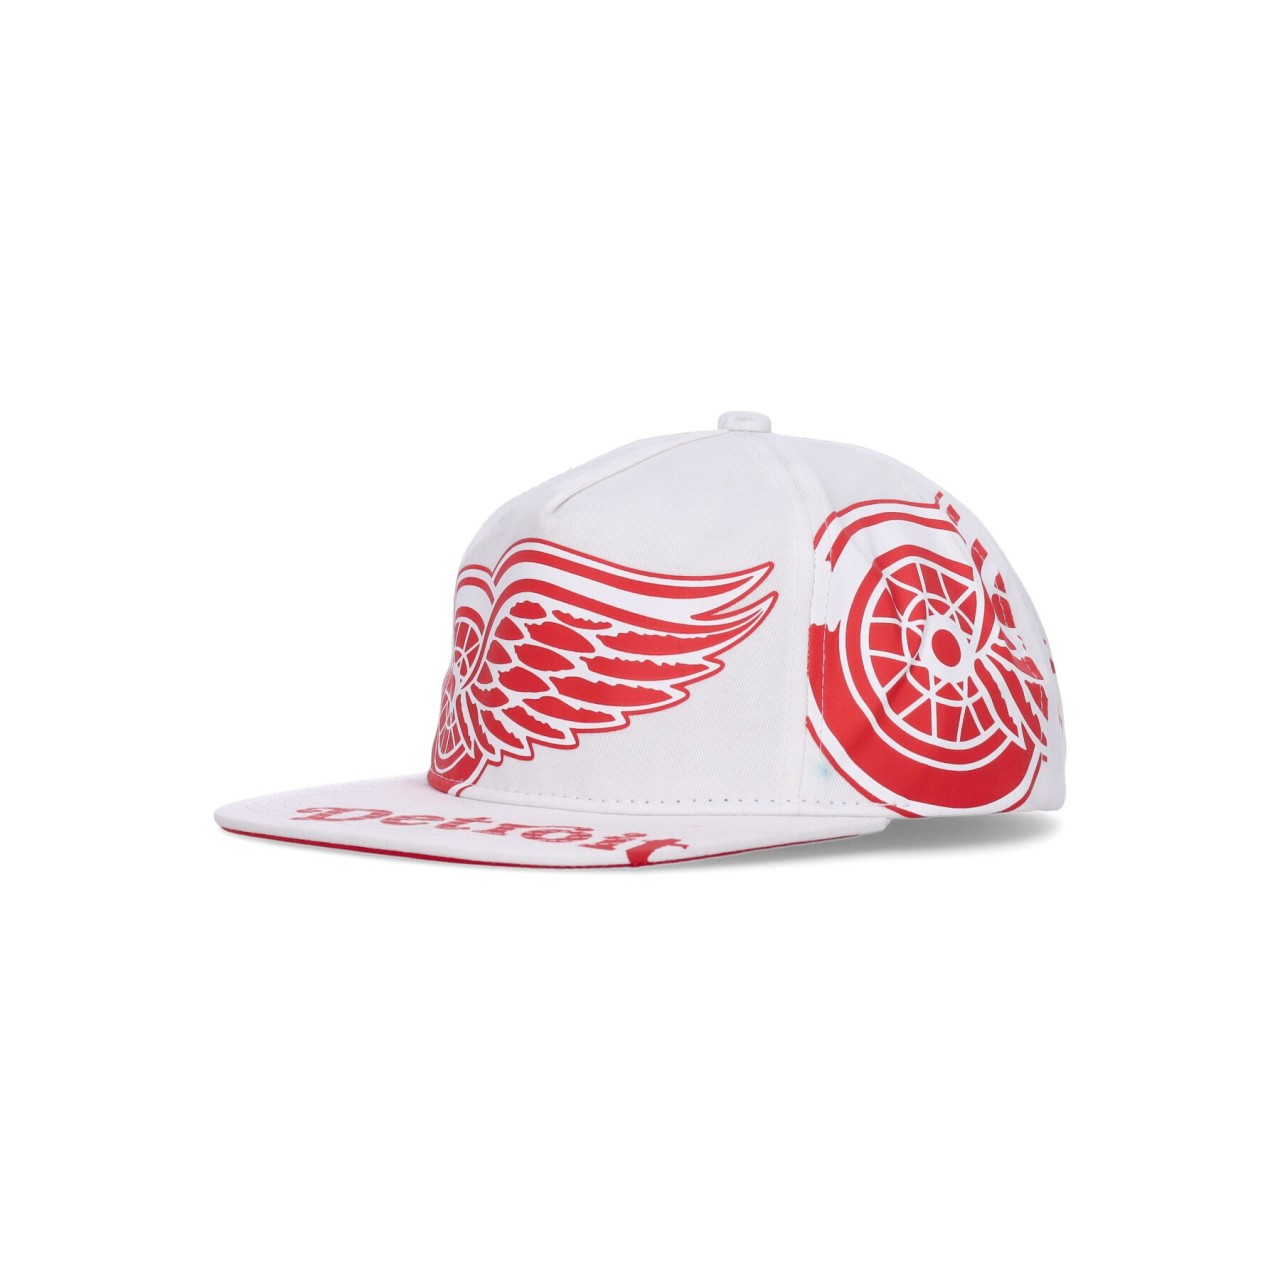 MITCHELL & NESS NHL IN YOUR FACE DEADSTOCK DETWIN HMUS5632-DRWYYPPPWHIT